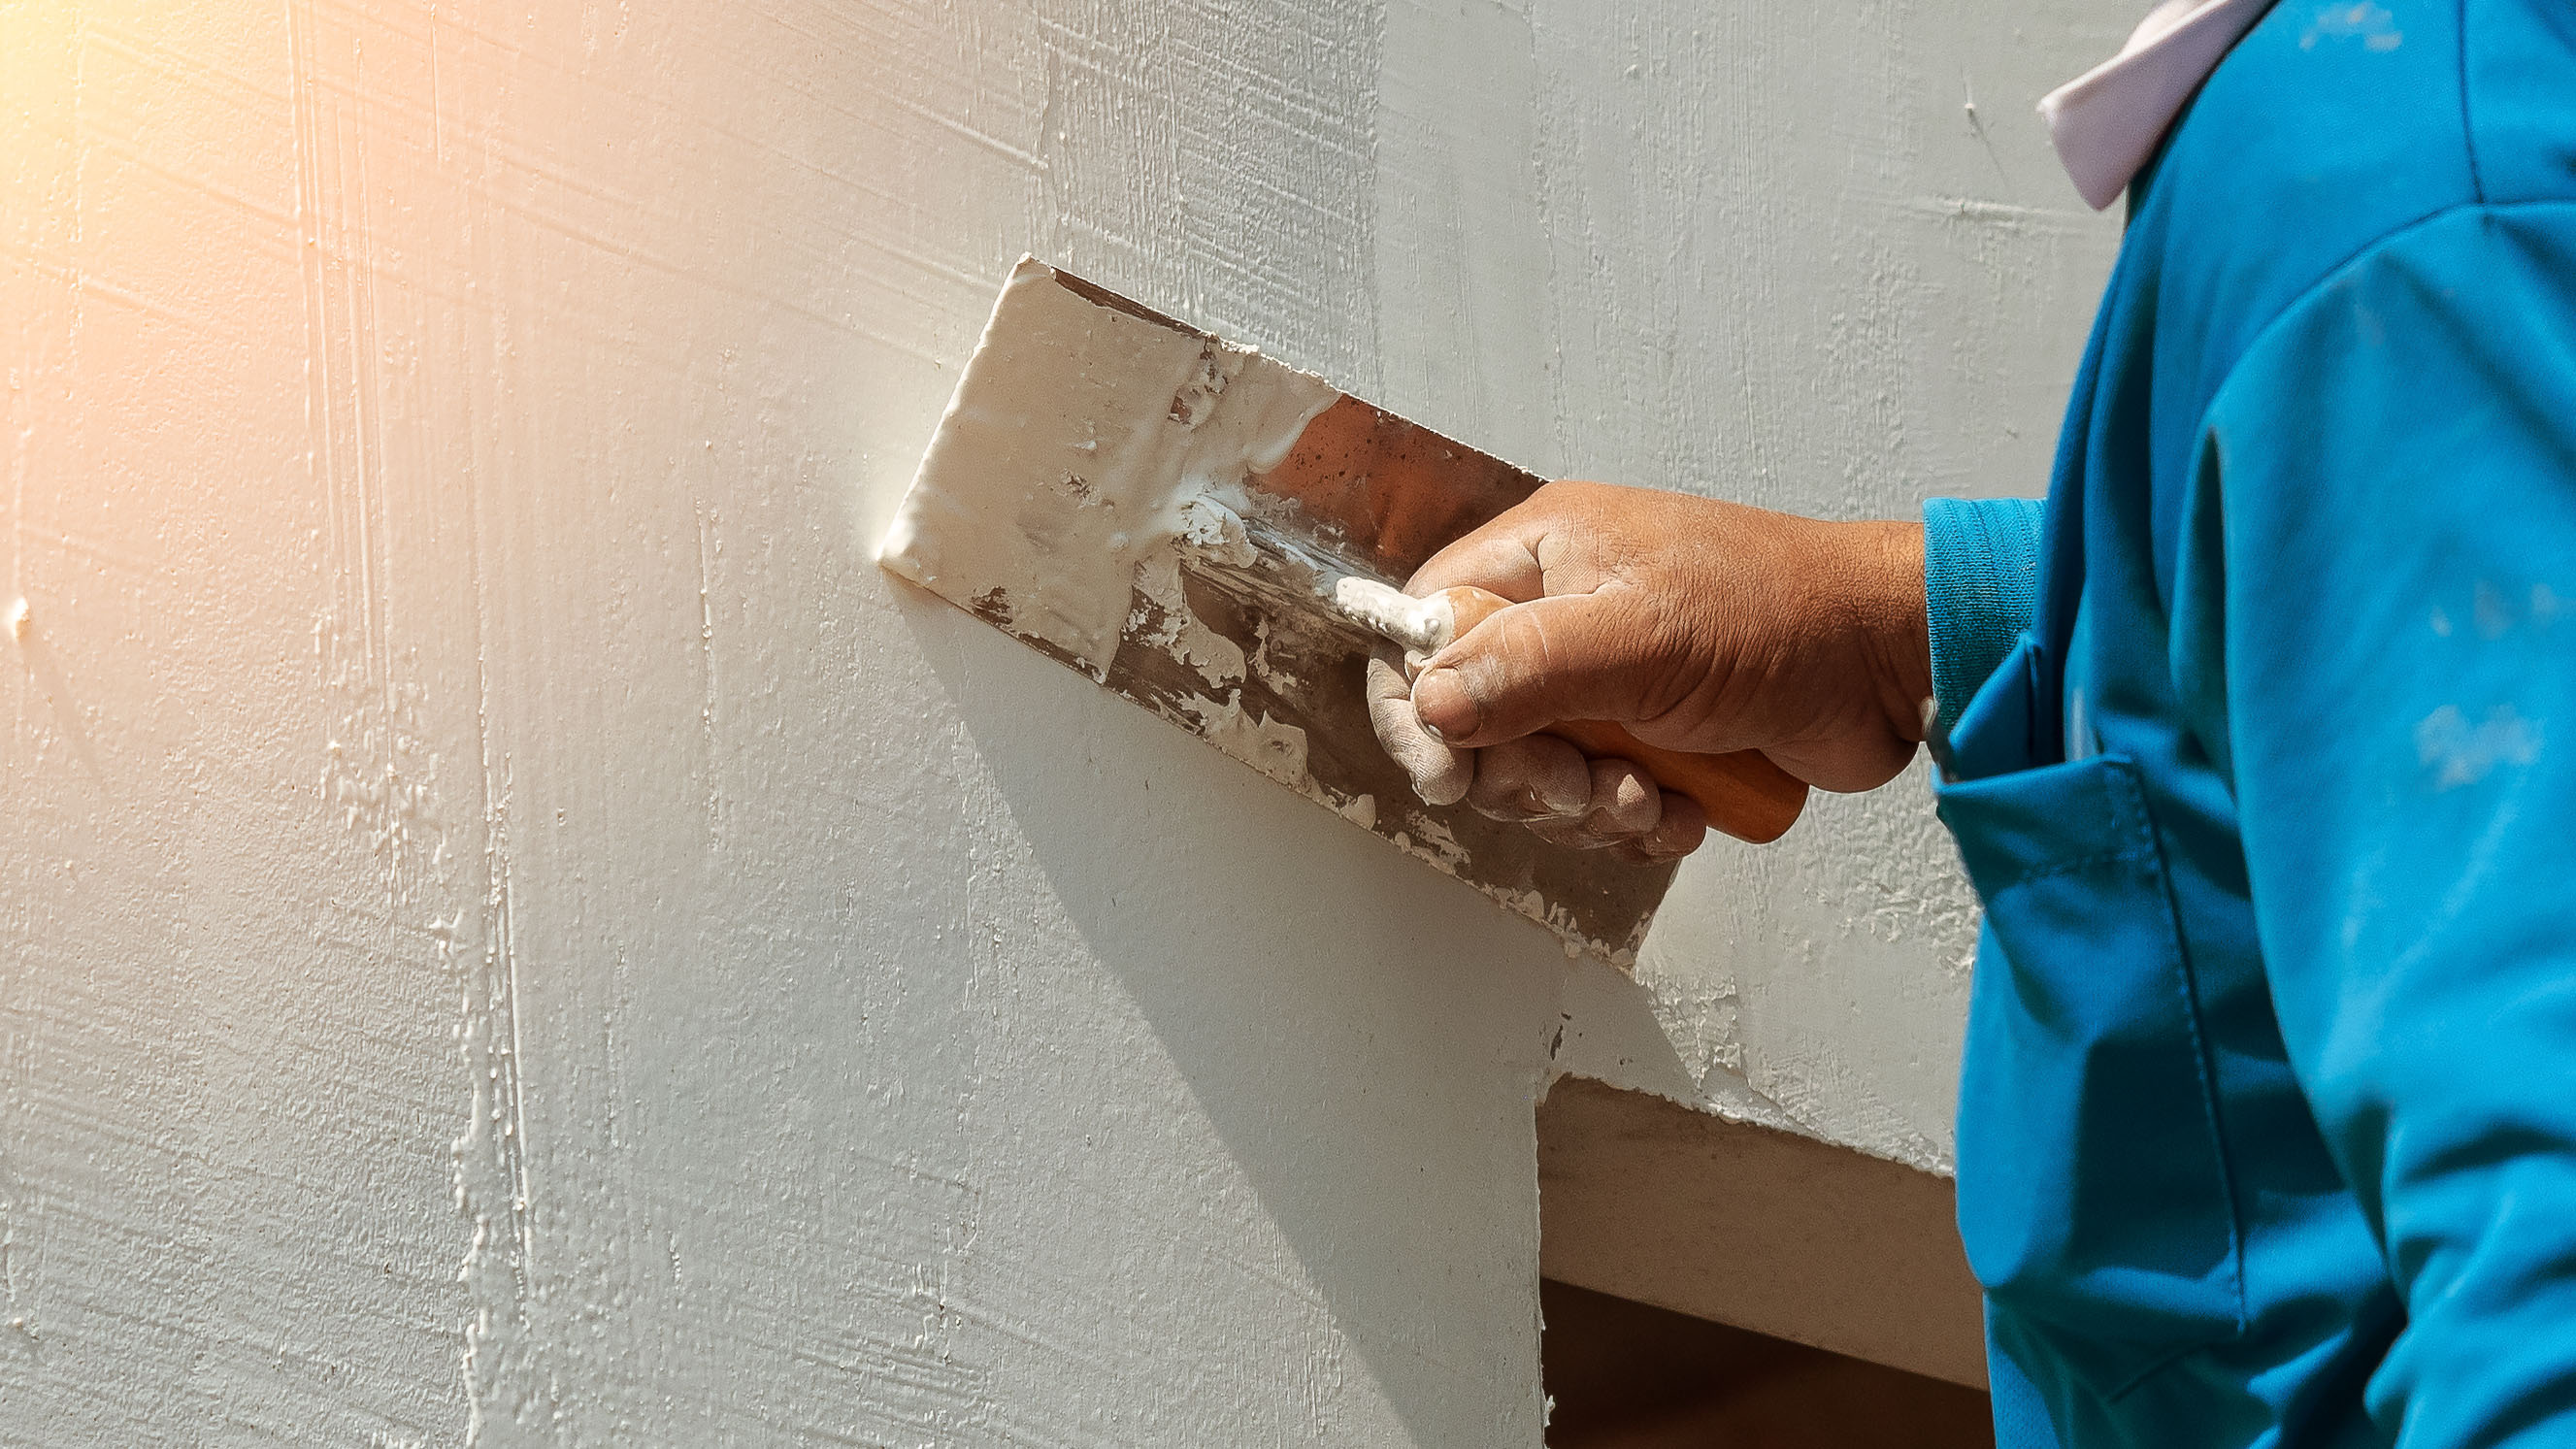 Plastering Walls - what technique to use when